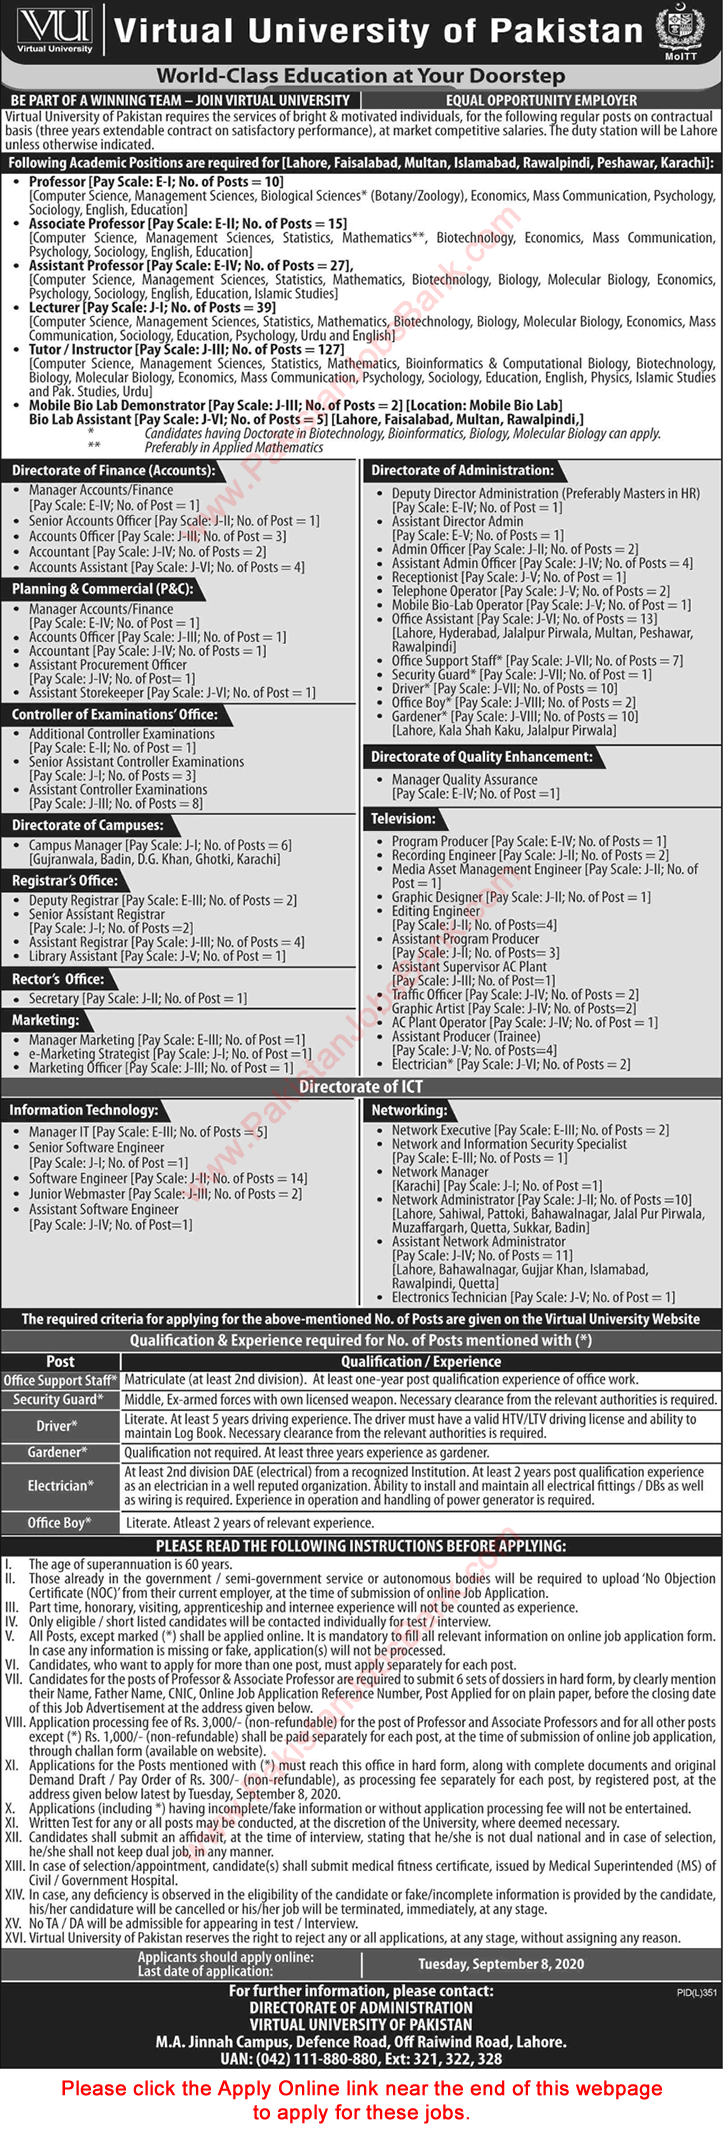 Virtual University Jobs August 2020 Apply Online Teaching Faculty & Others Latest